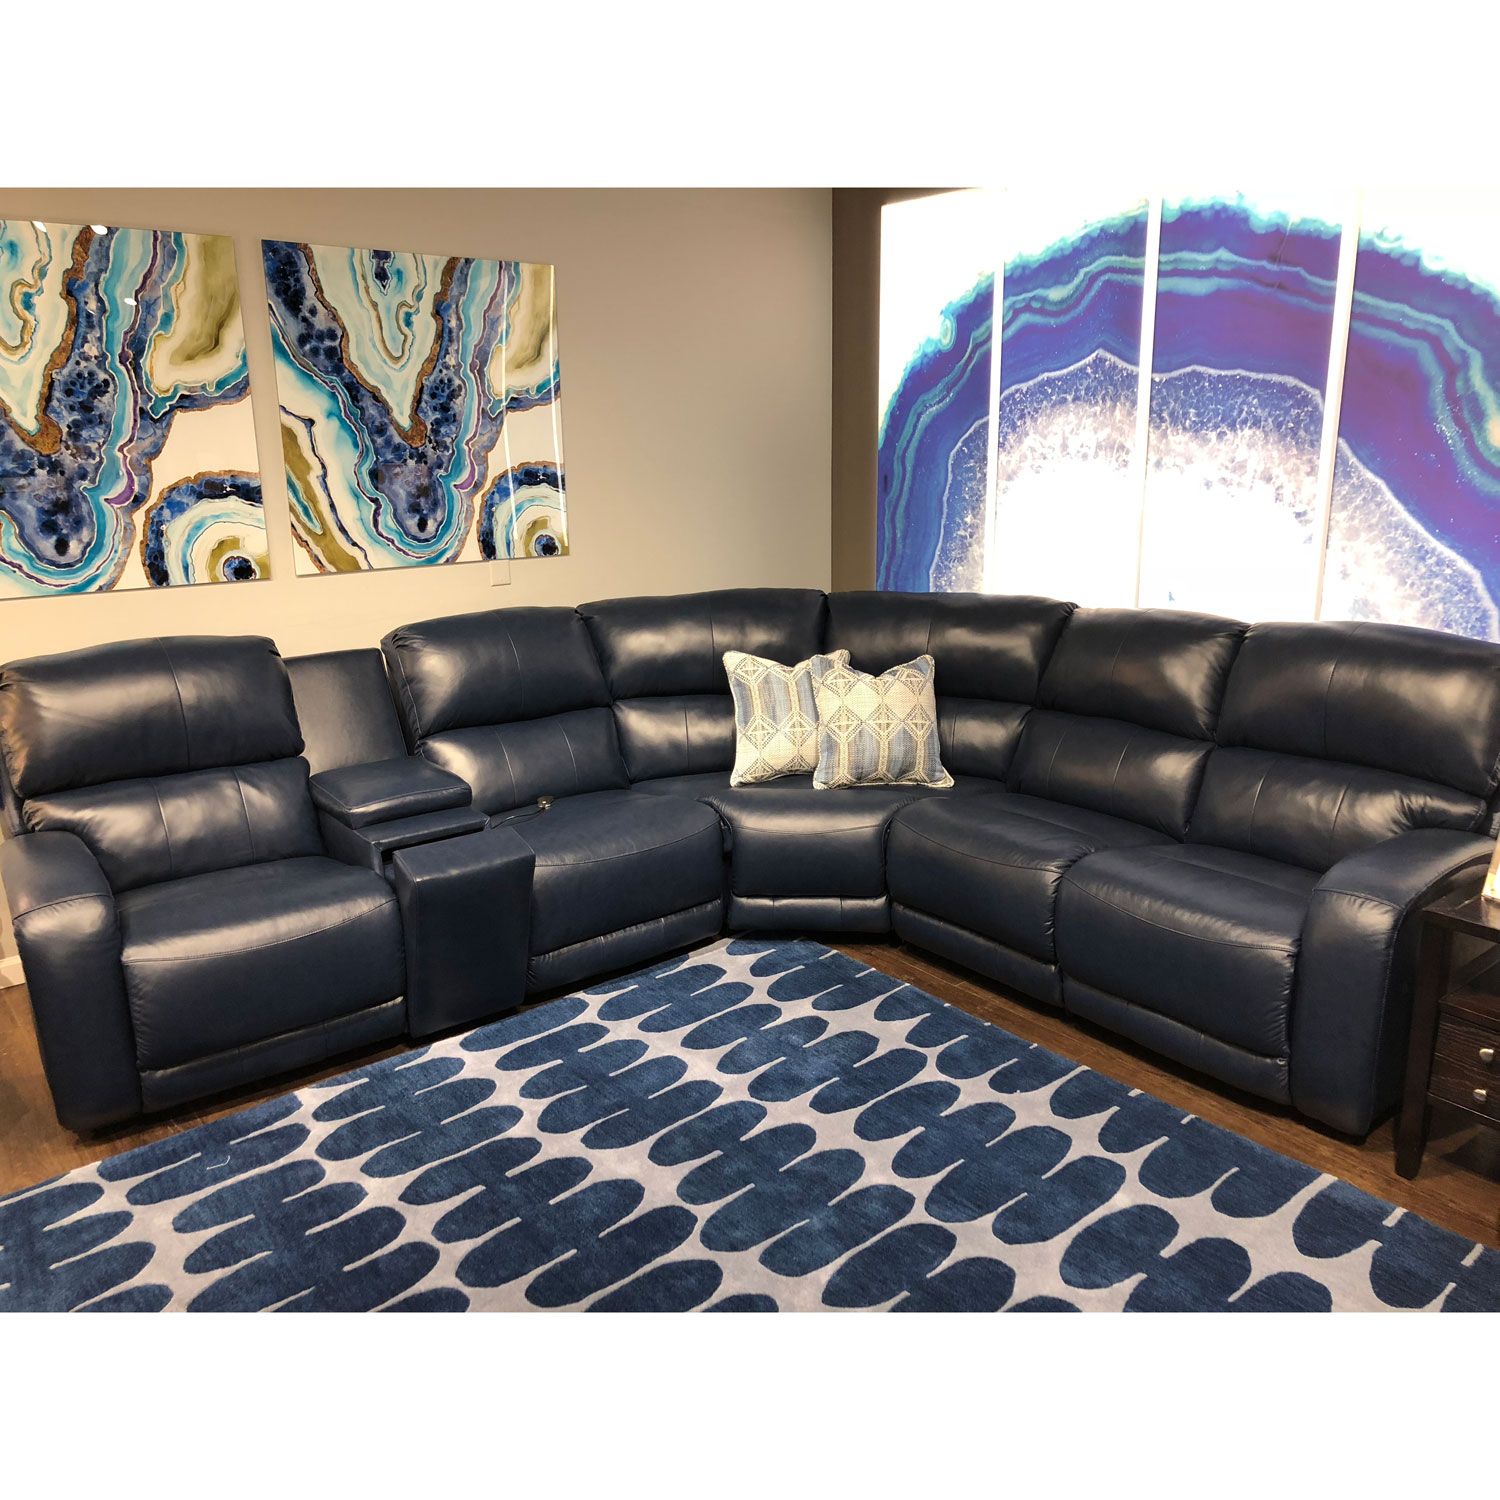 Southern Motion 884 05p 46 90p 84 80, Blue Leather Recliner Sectional Sofa